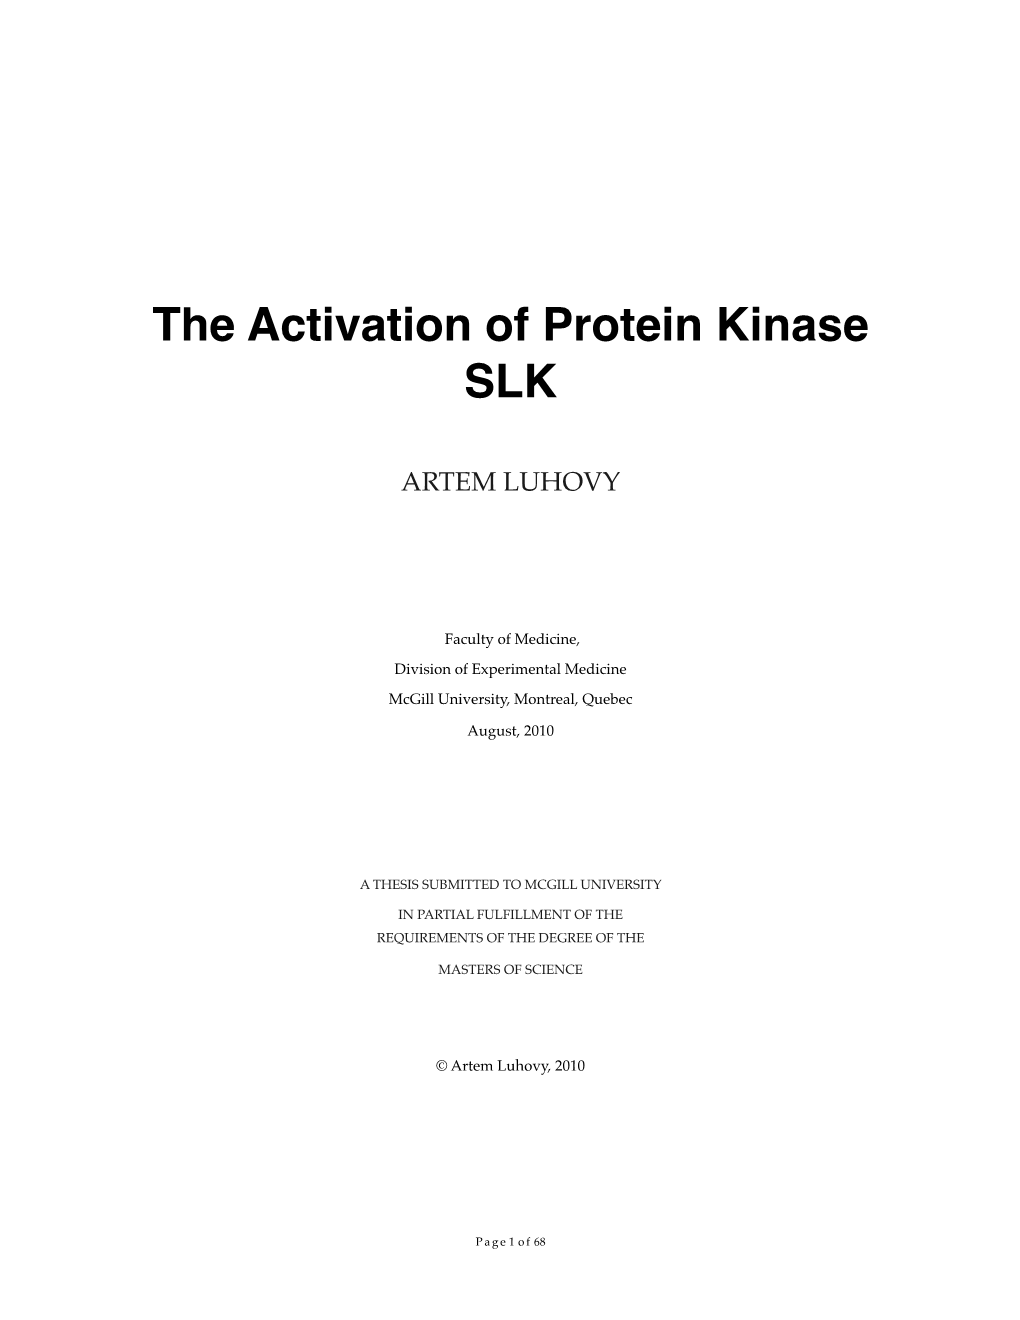 The Activation of Protein Kinase SLK